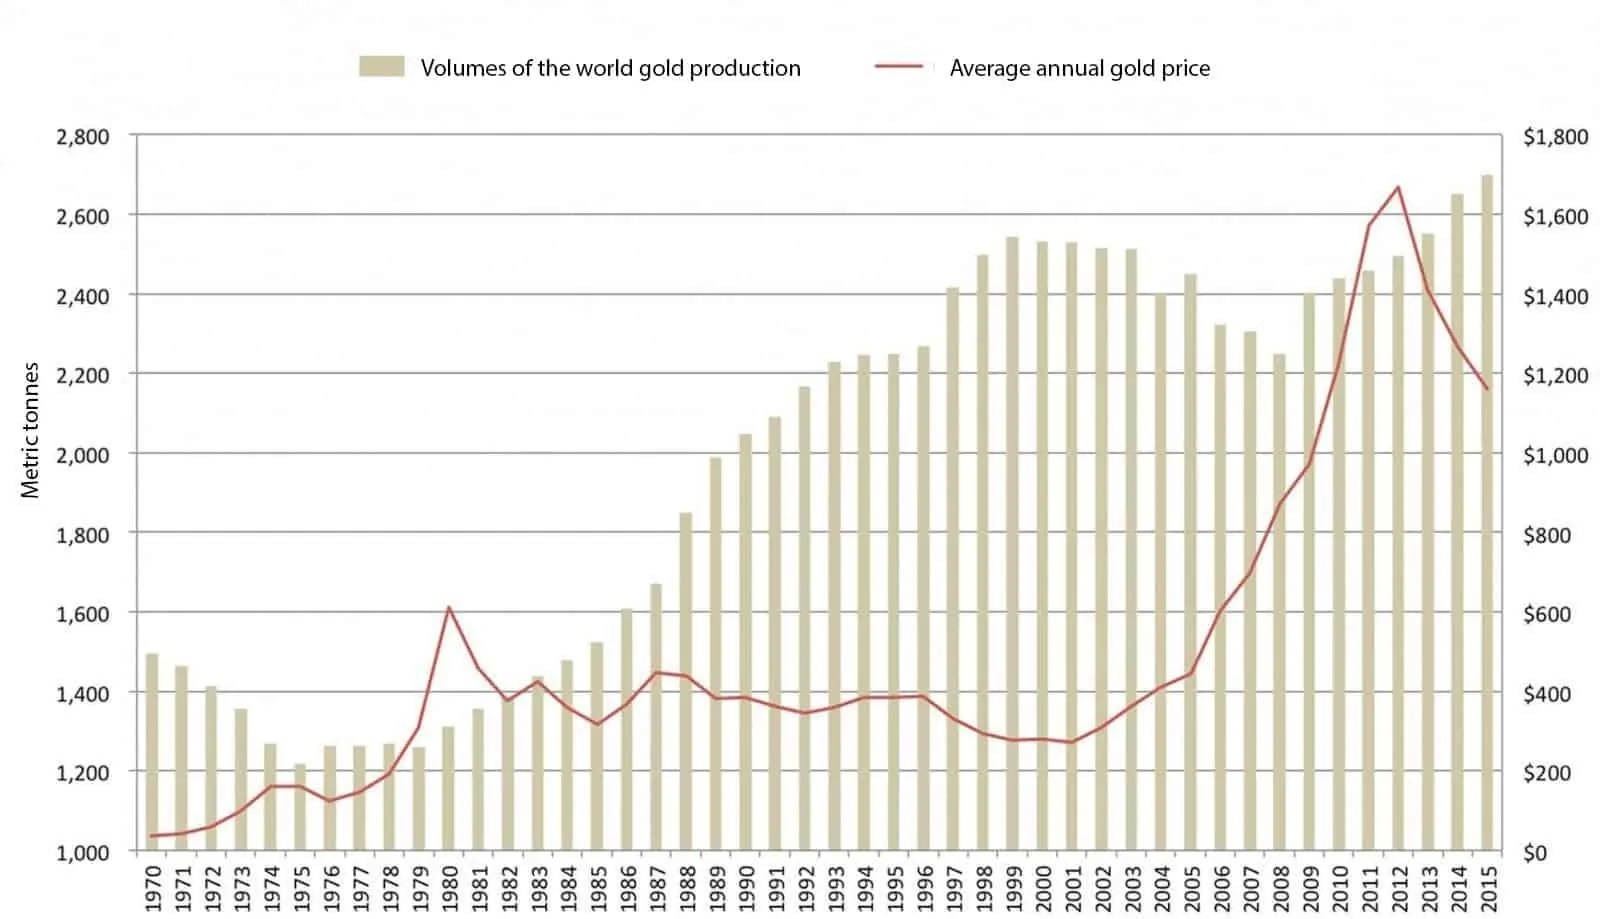 Volumes of the world gold production